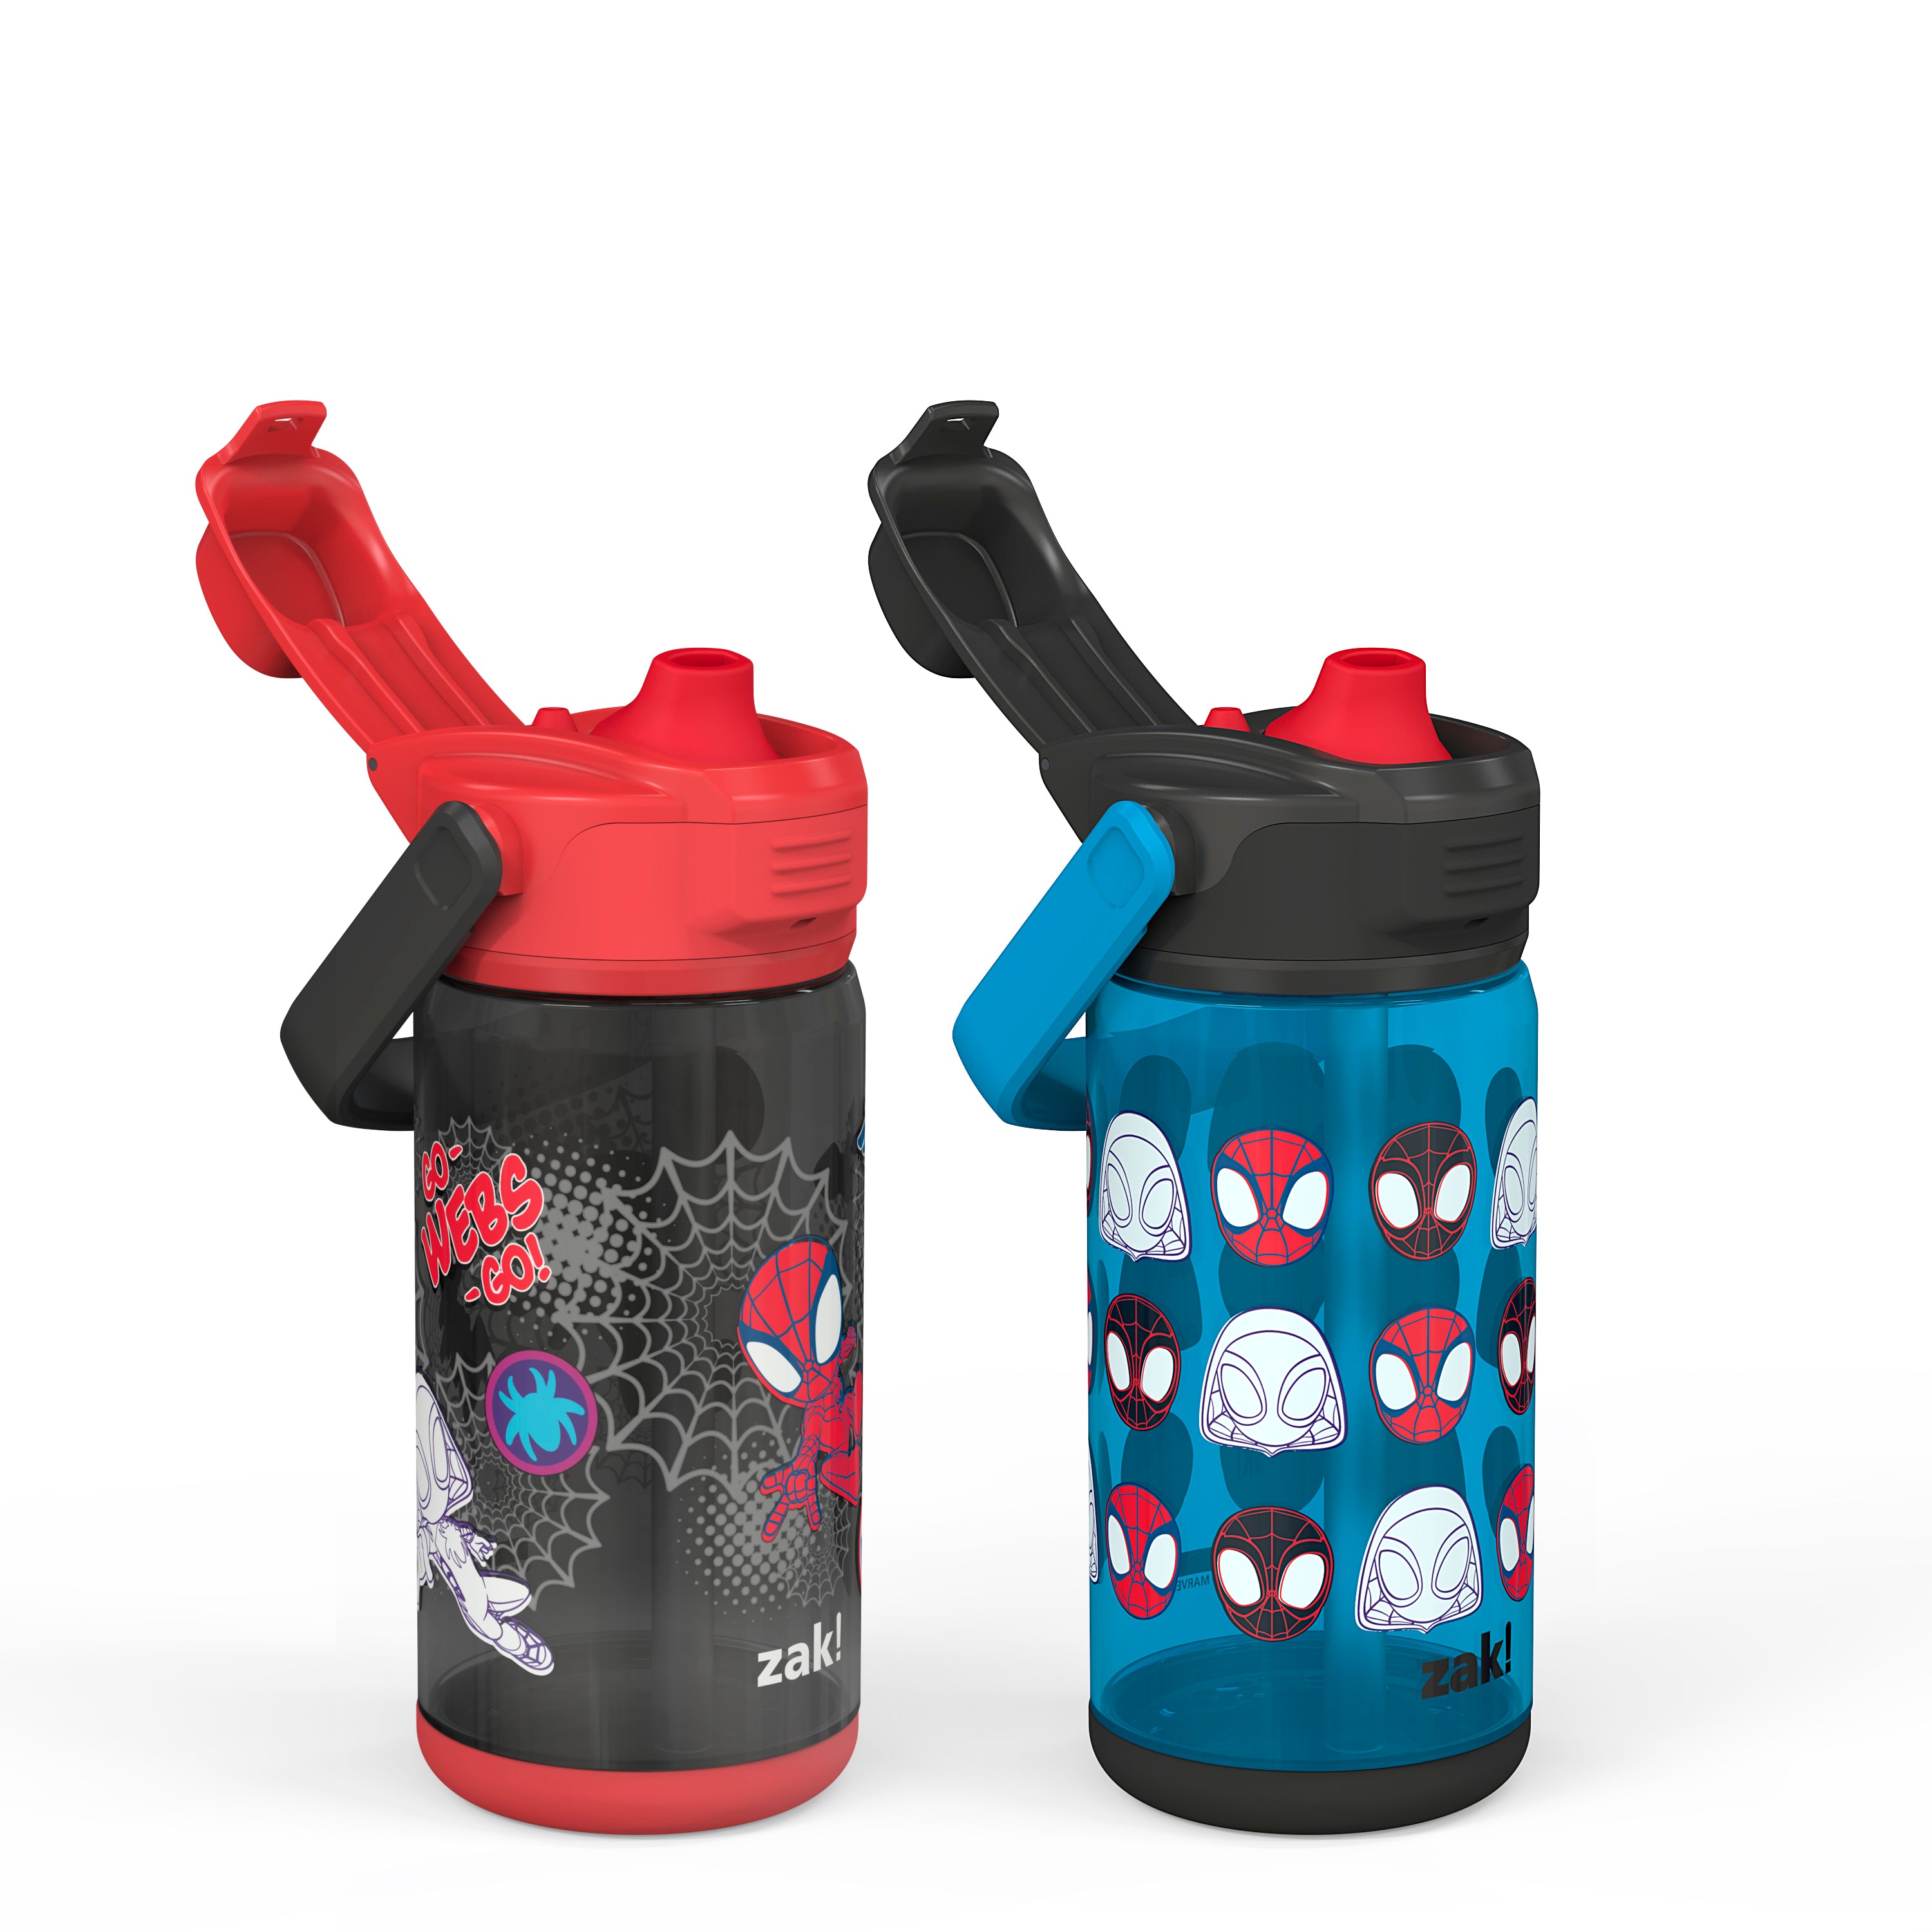 Marvel Spider-Man Spidey Beacon 2-Piece Kids Water Bottle Set with Covered Spout, 16 Ounces